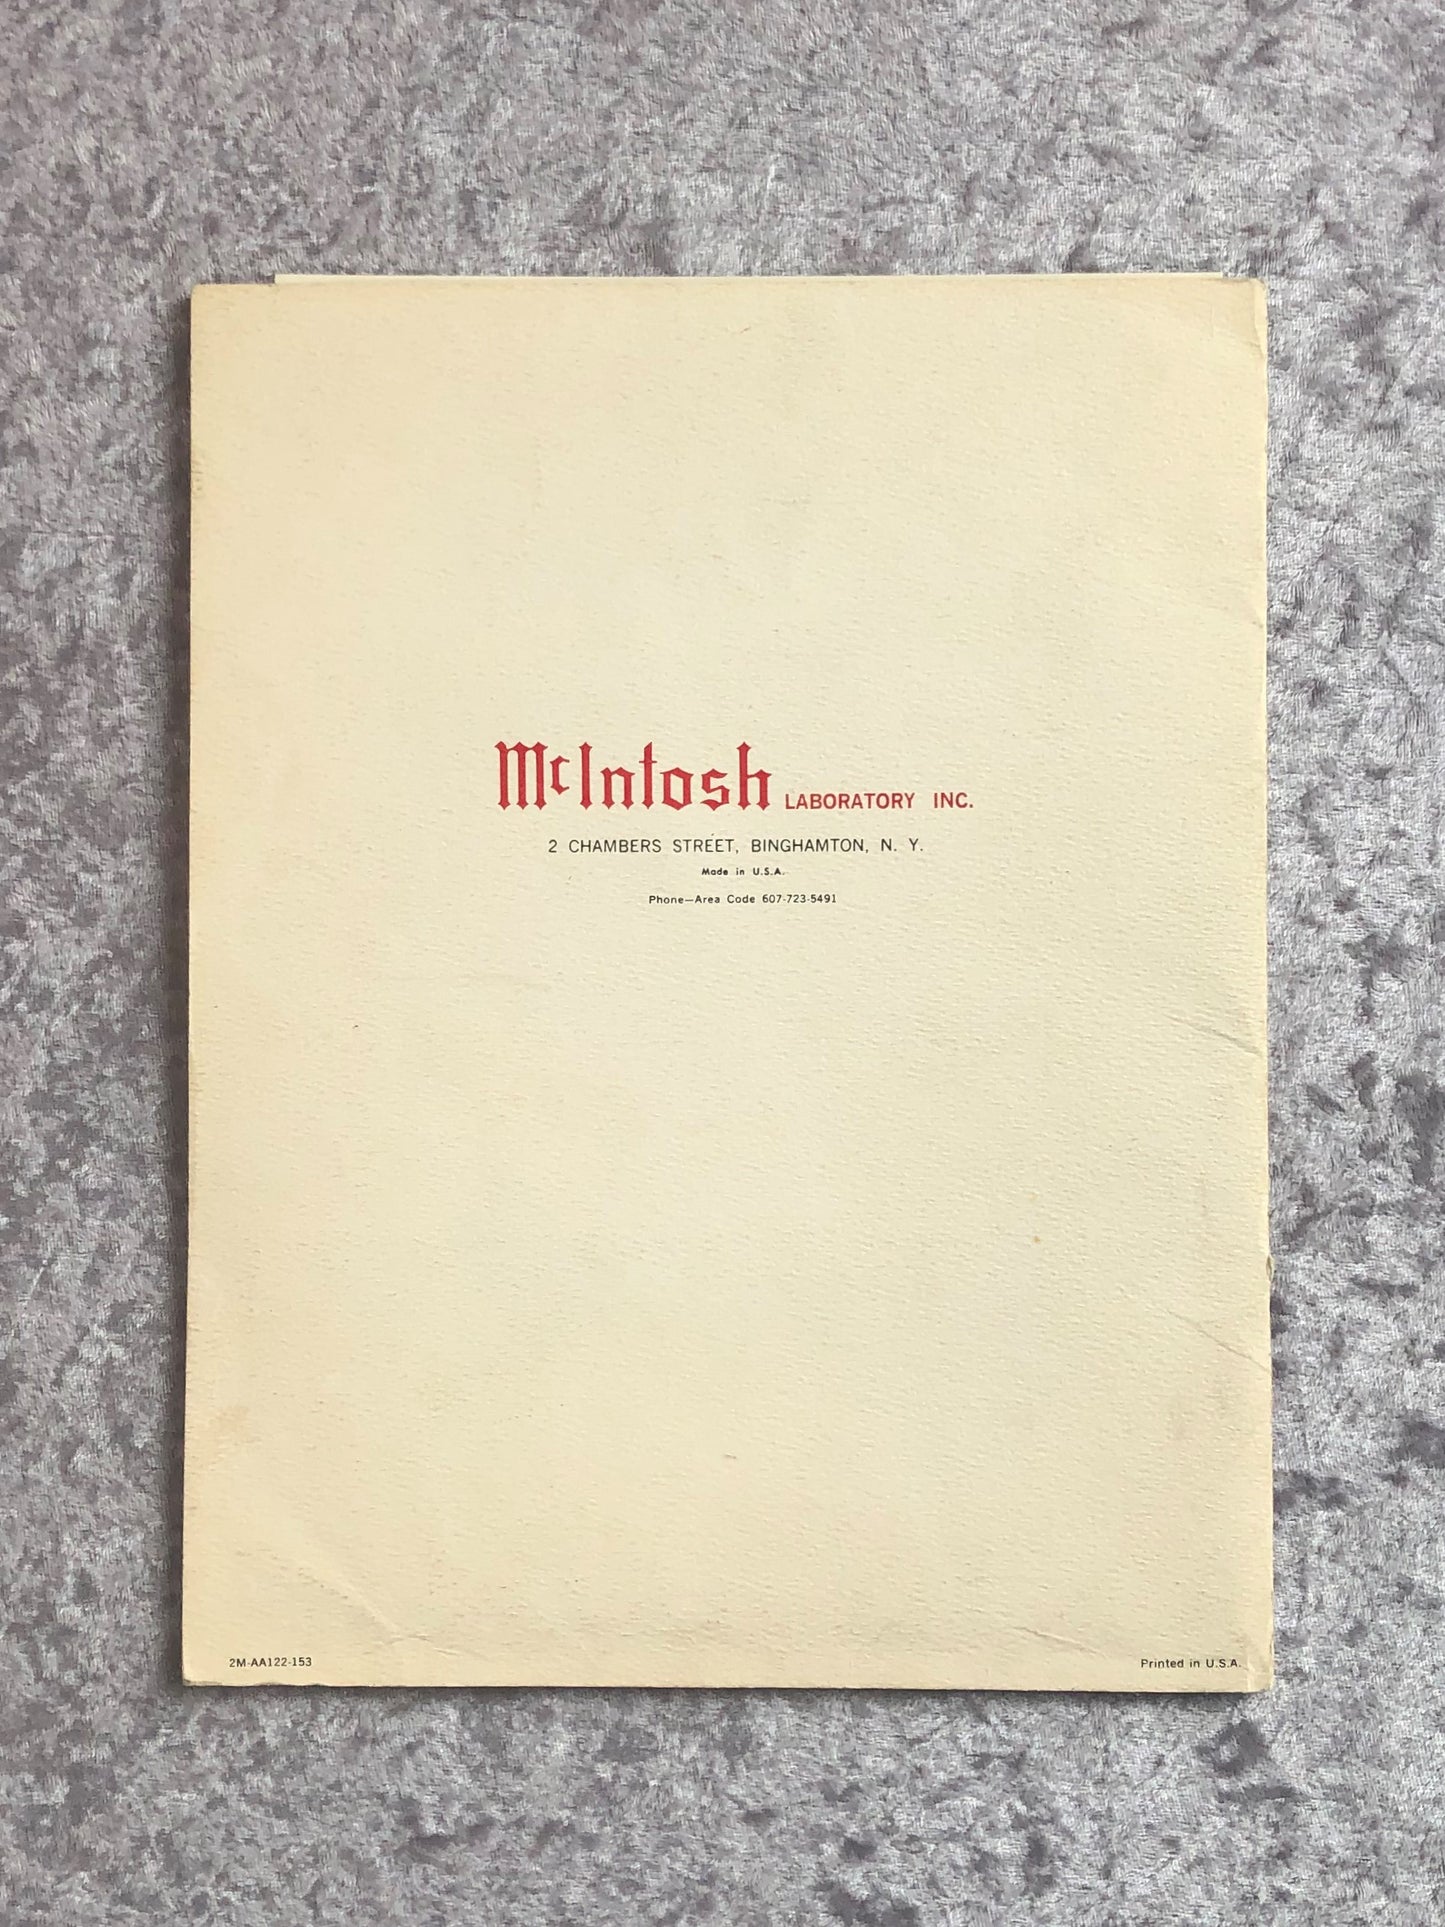 Vintage McIntosh MC75 Owner's Manual, Maintenance Manual/Schematic, and Warranty Cards